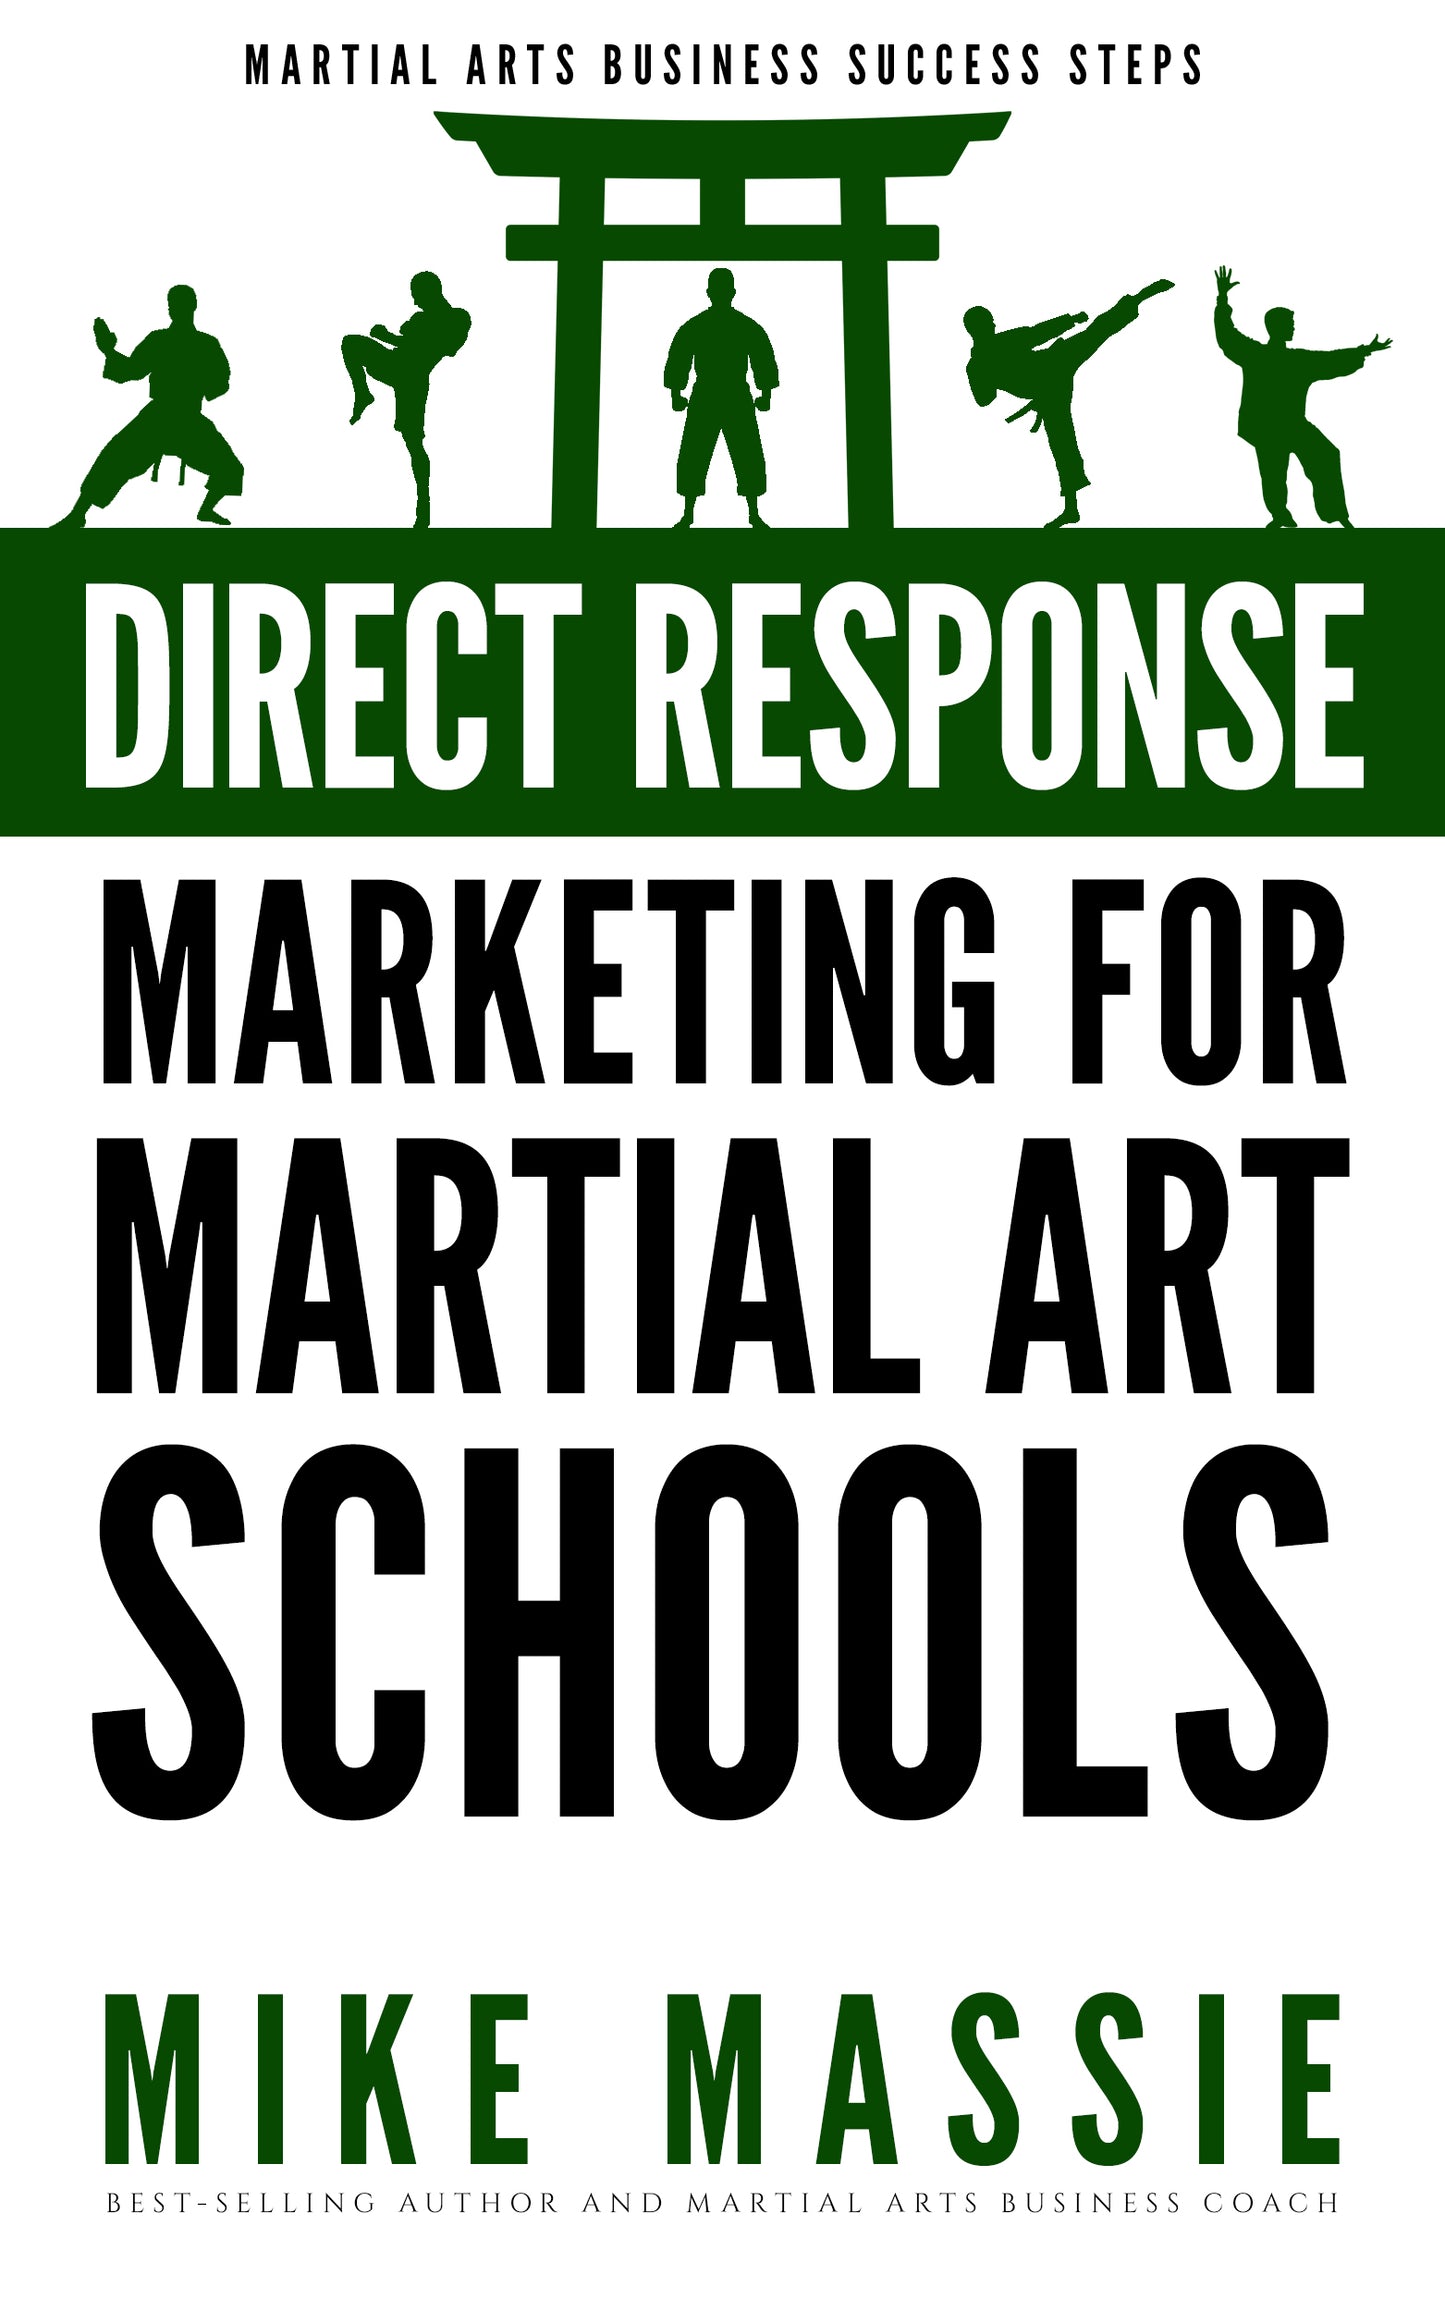 Direct Response Marketing For Martial Art School Owners (Kindle and ePub)